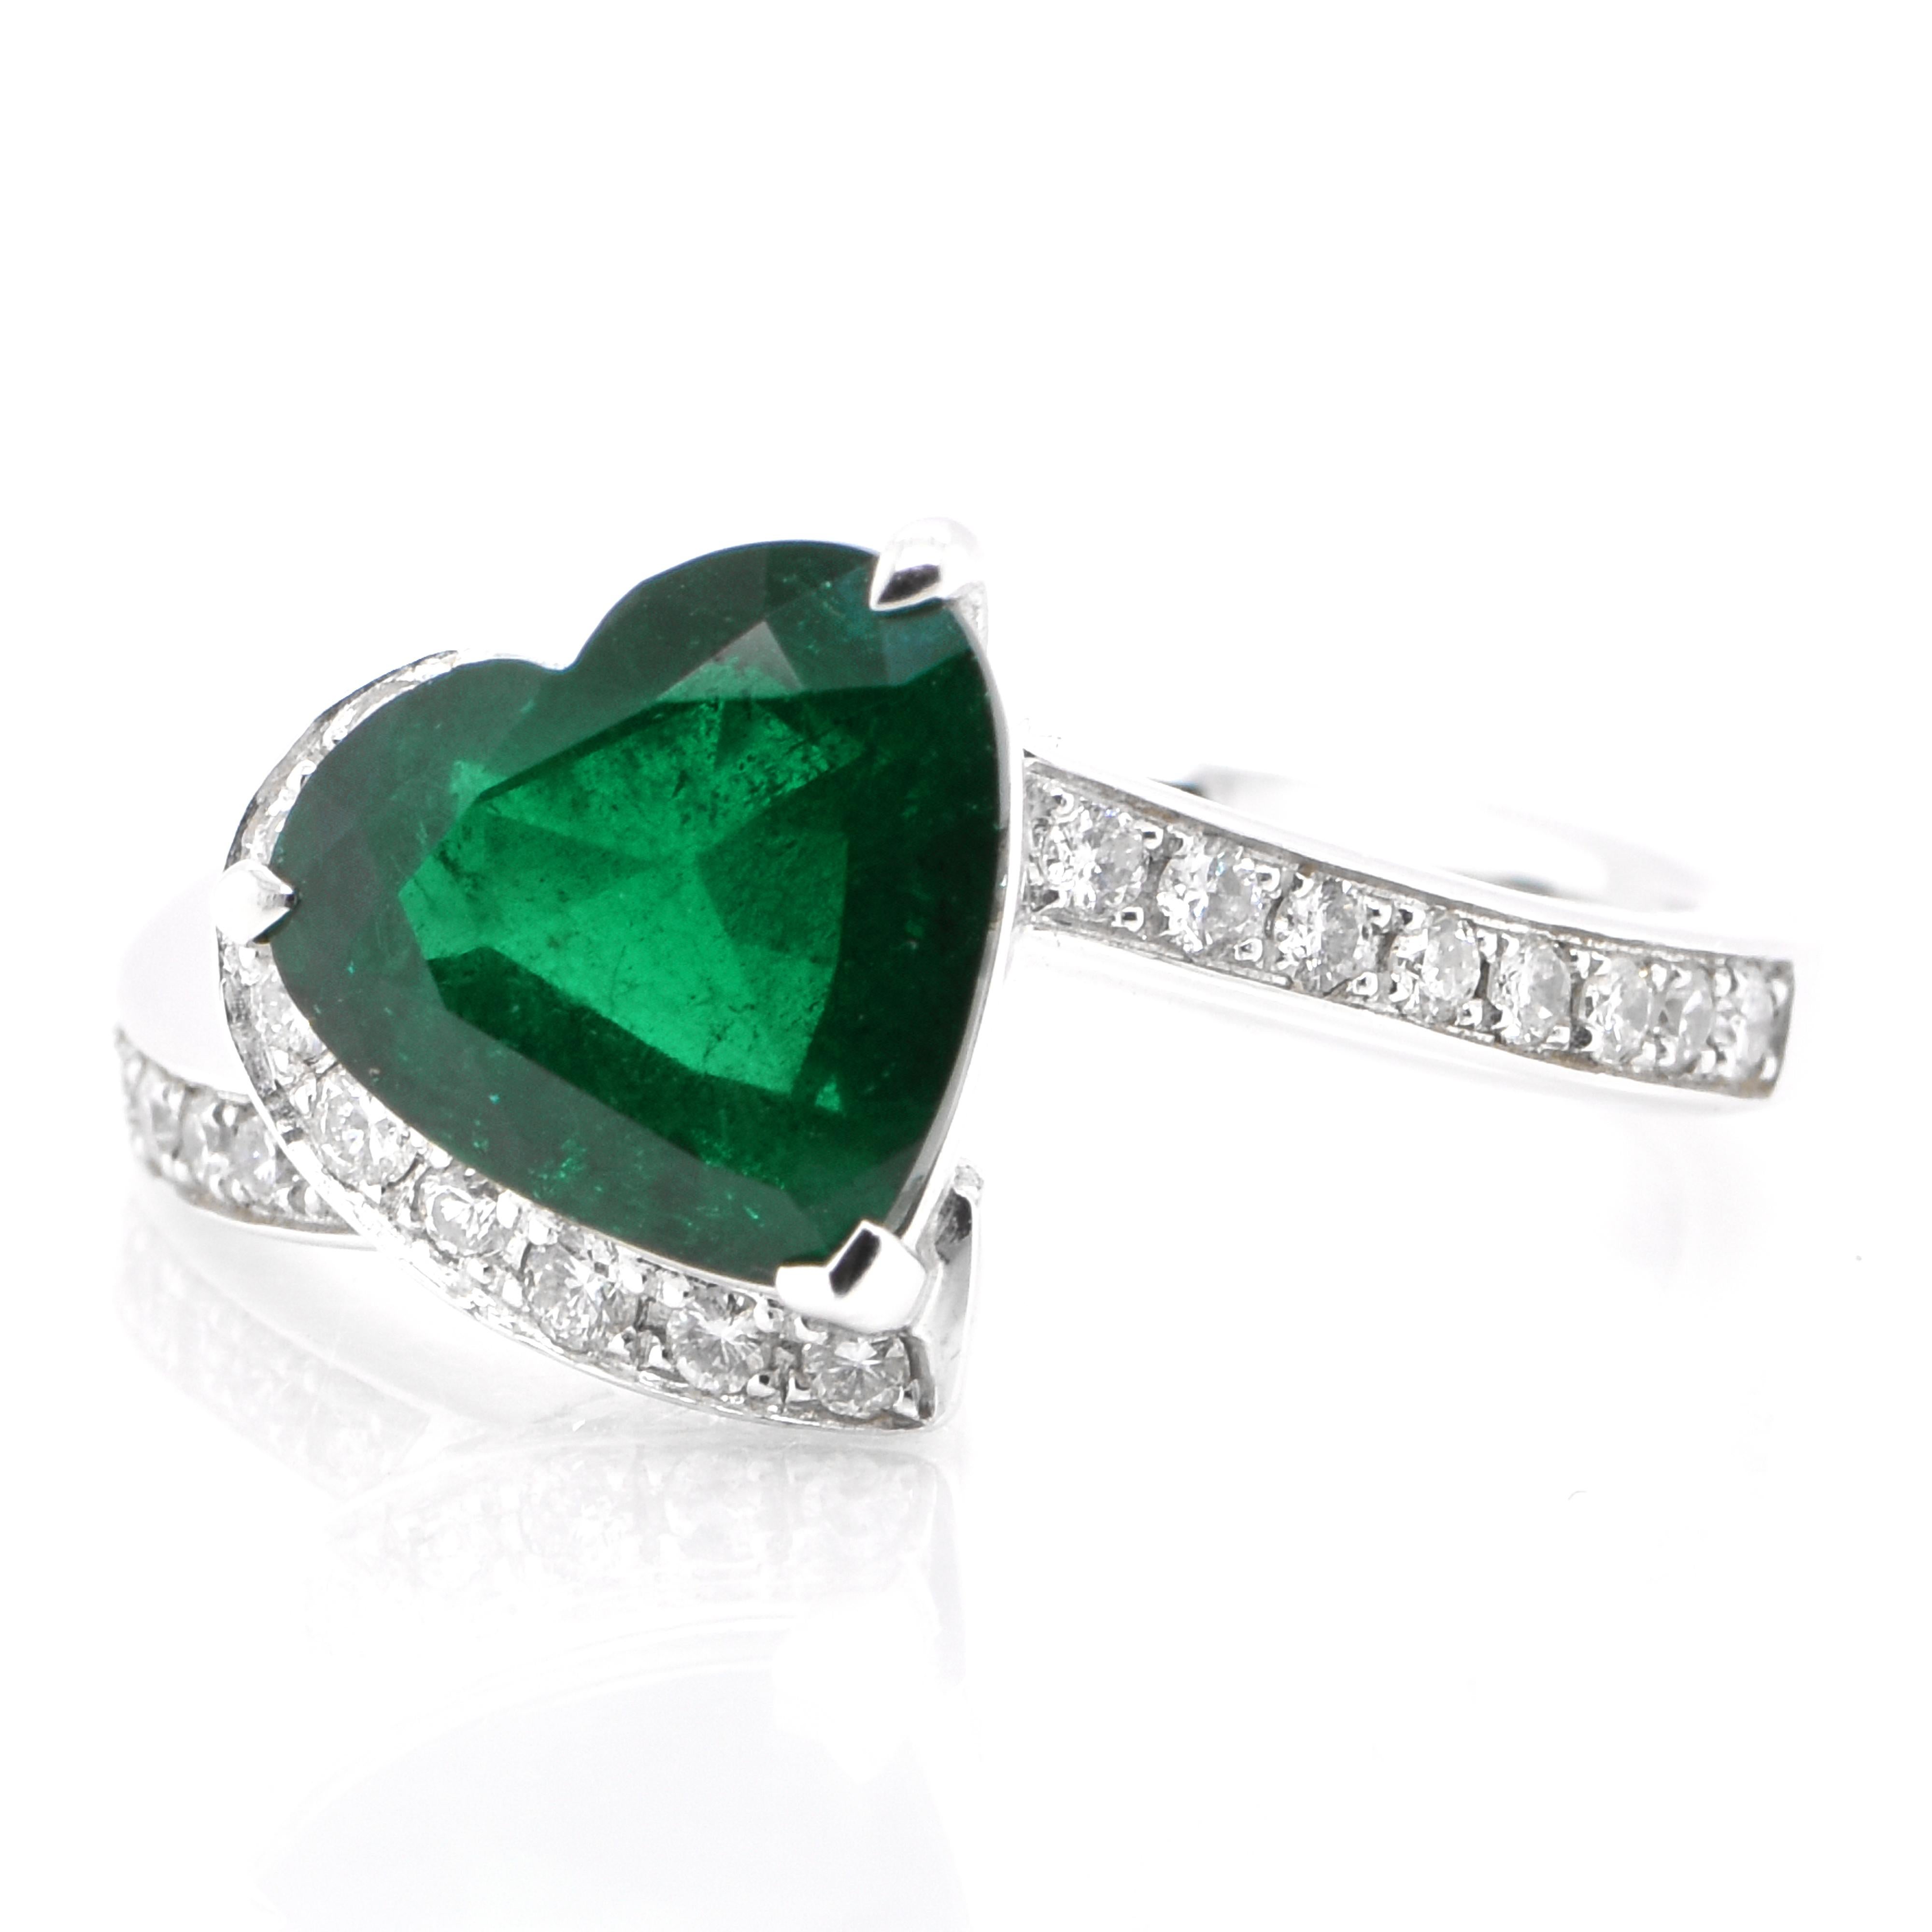 A stunning ring featuring a GRS Certified 2.29 Carat Natural Vivid Green, Insignificantly Treated Emerald and 0.33 Carats of Diamond Accents set in Platinum. People have admired emerald’s green for thousands of years. Emeralds have always been